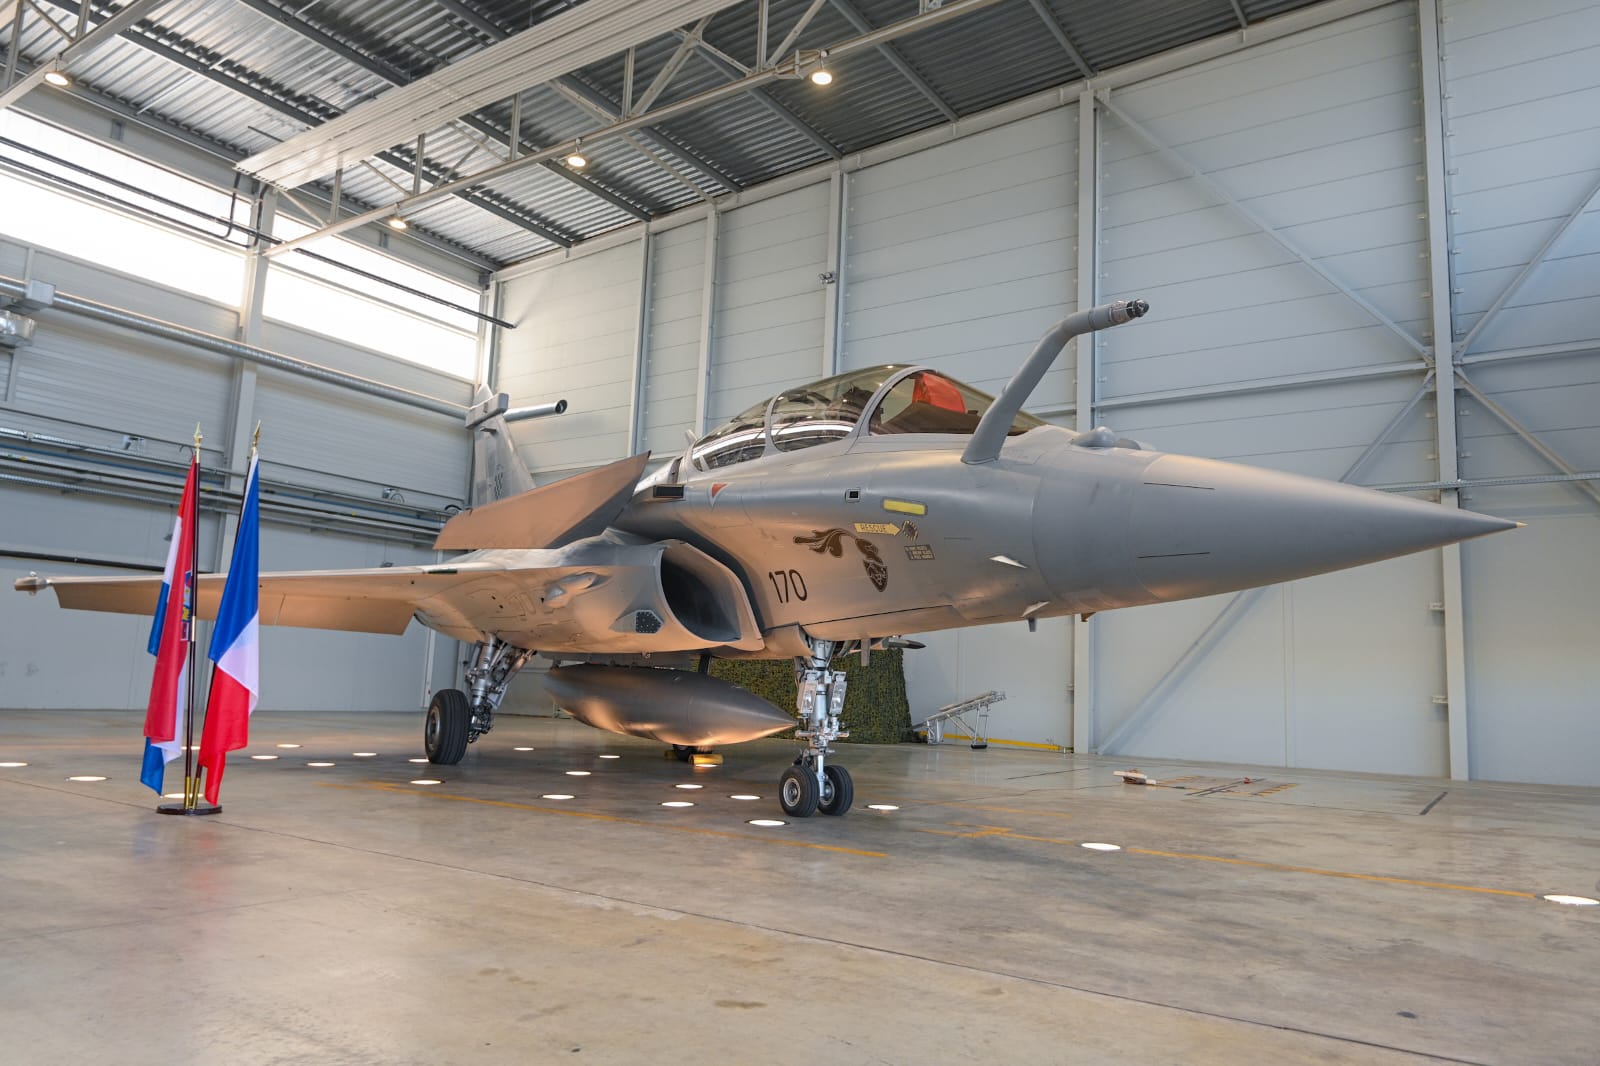 Croatia's first Rafale multirole combat jet received from the French government